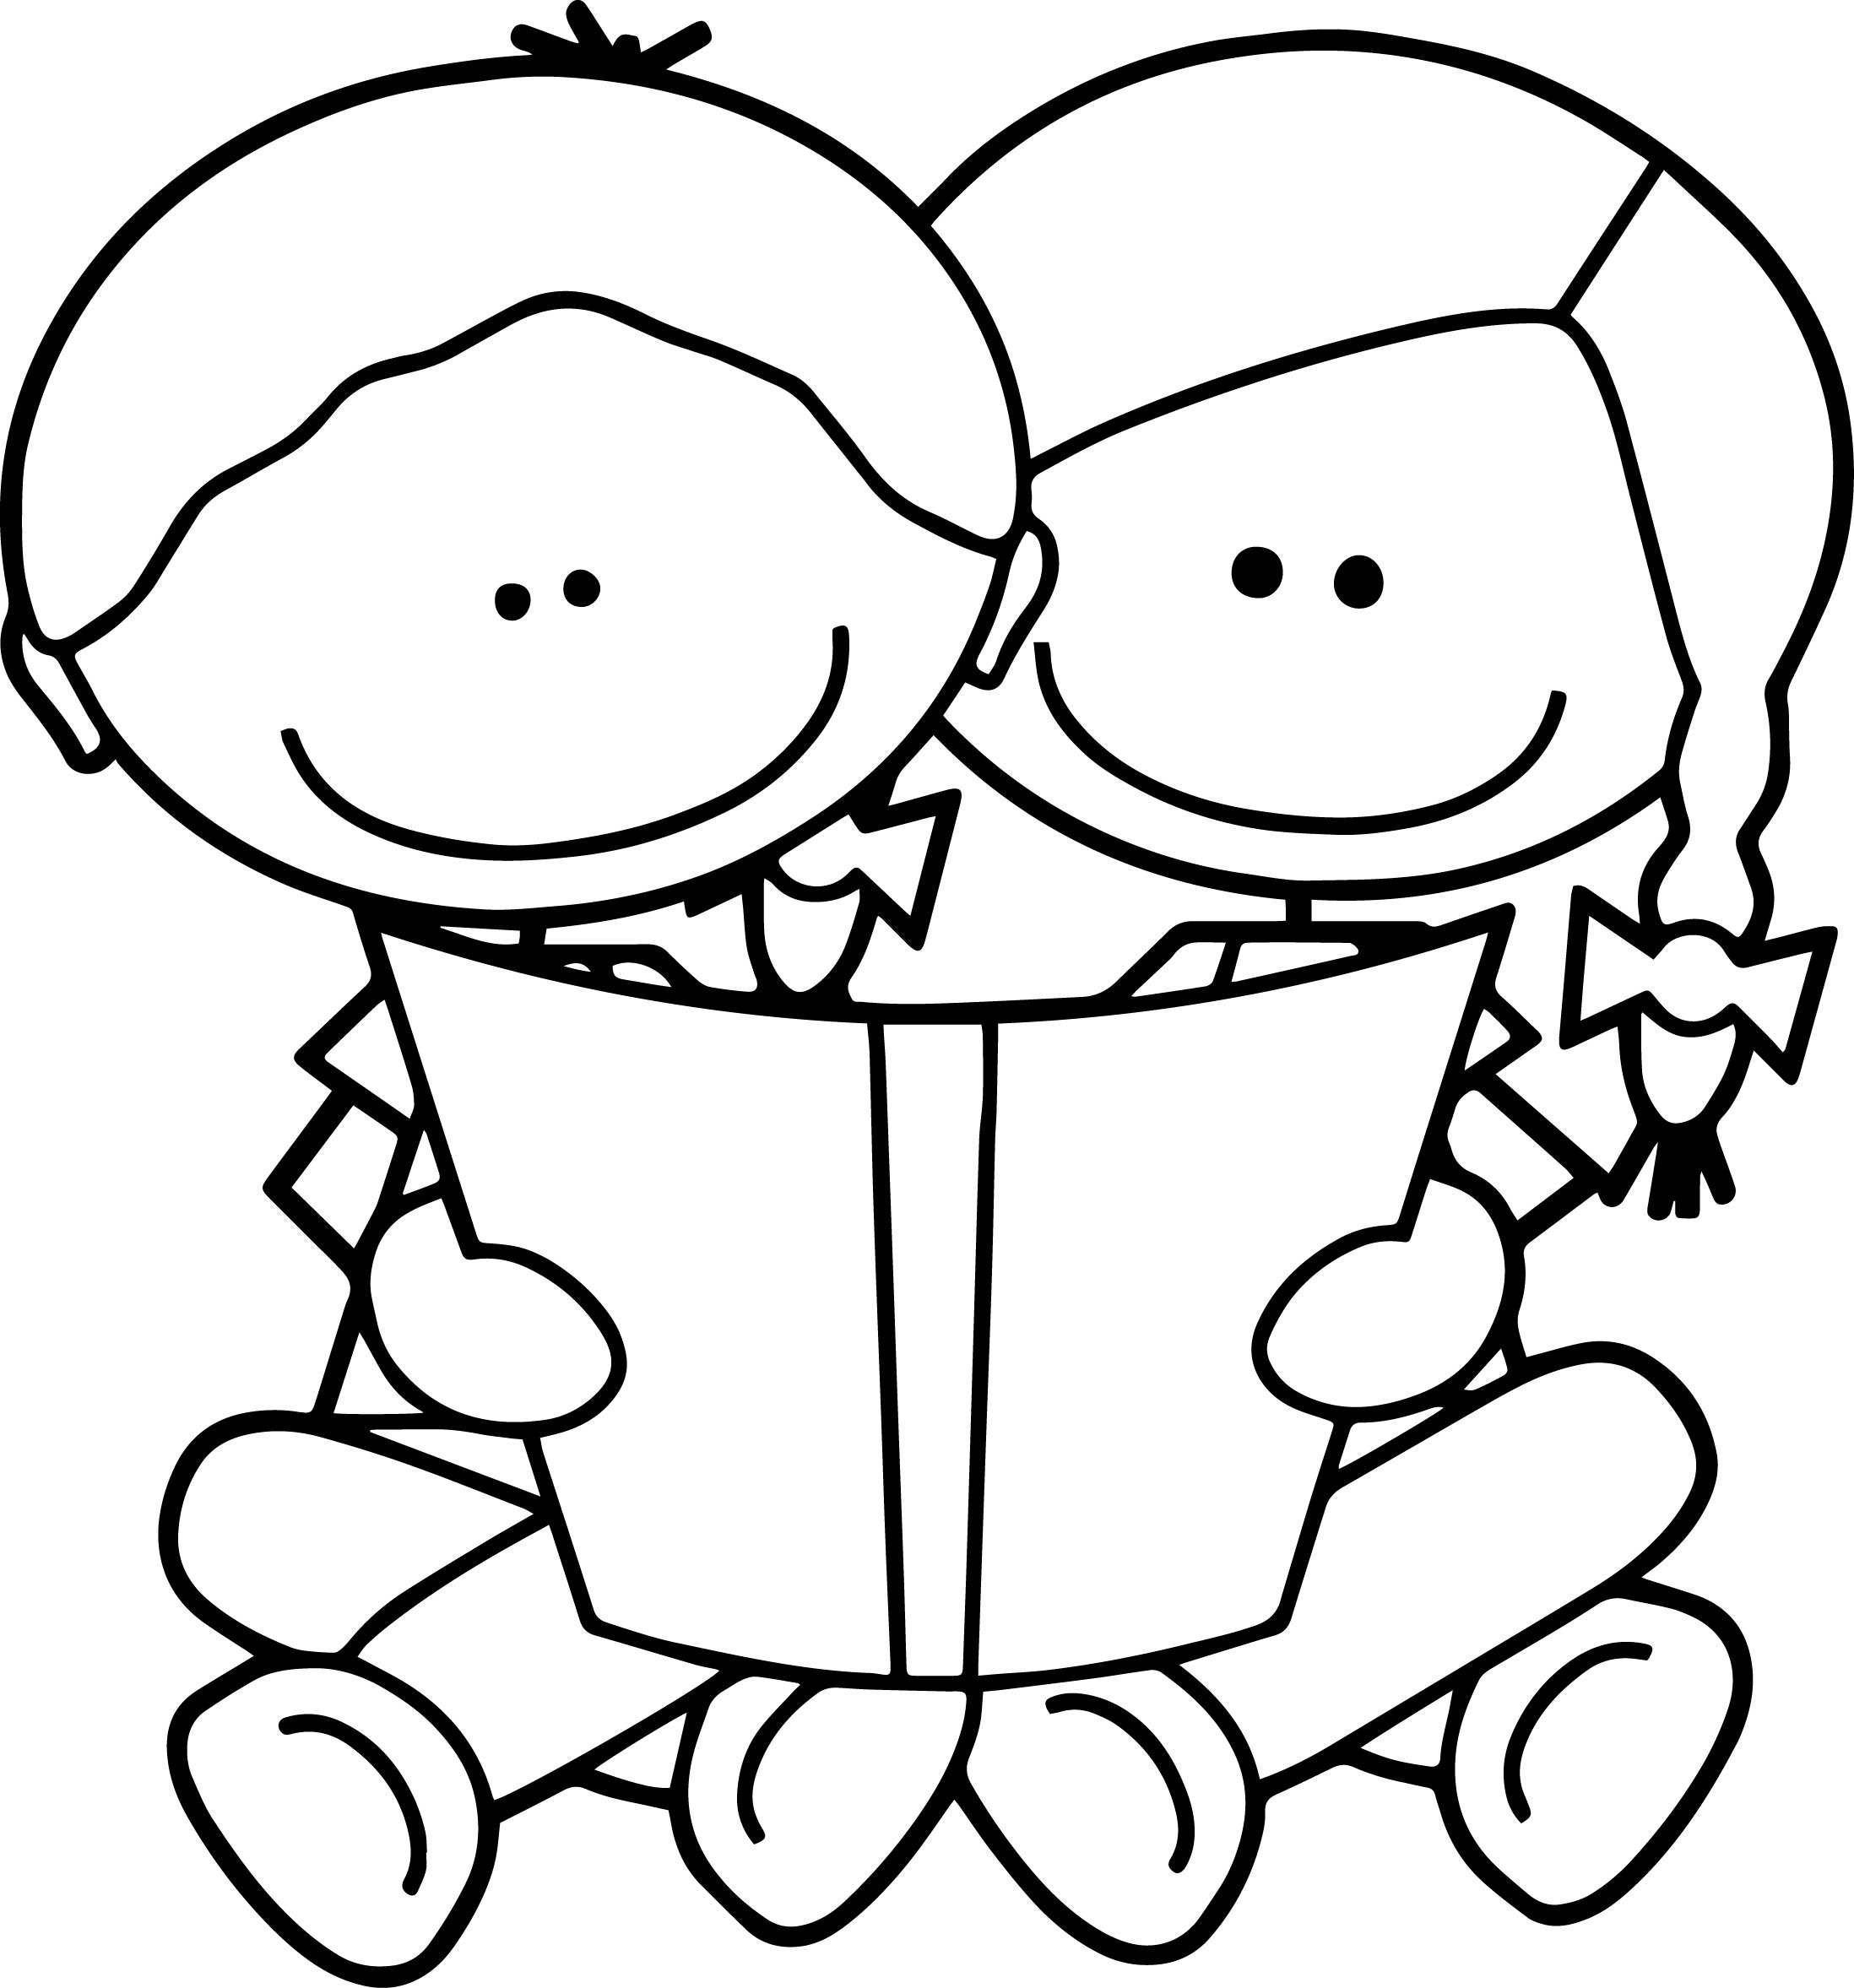 The 25 Best Ideas for Kids Reading Coloring Pages - Home, Family, Style